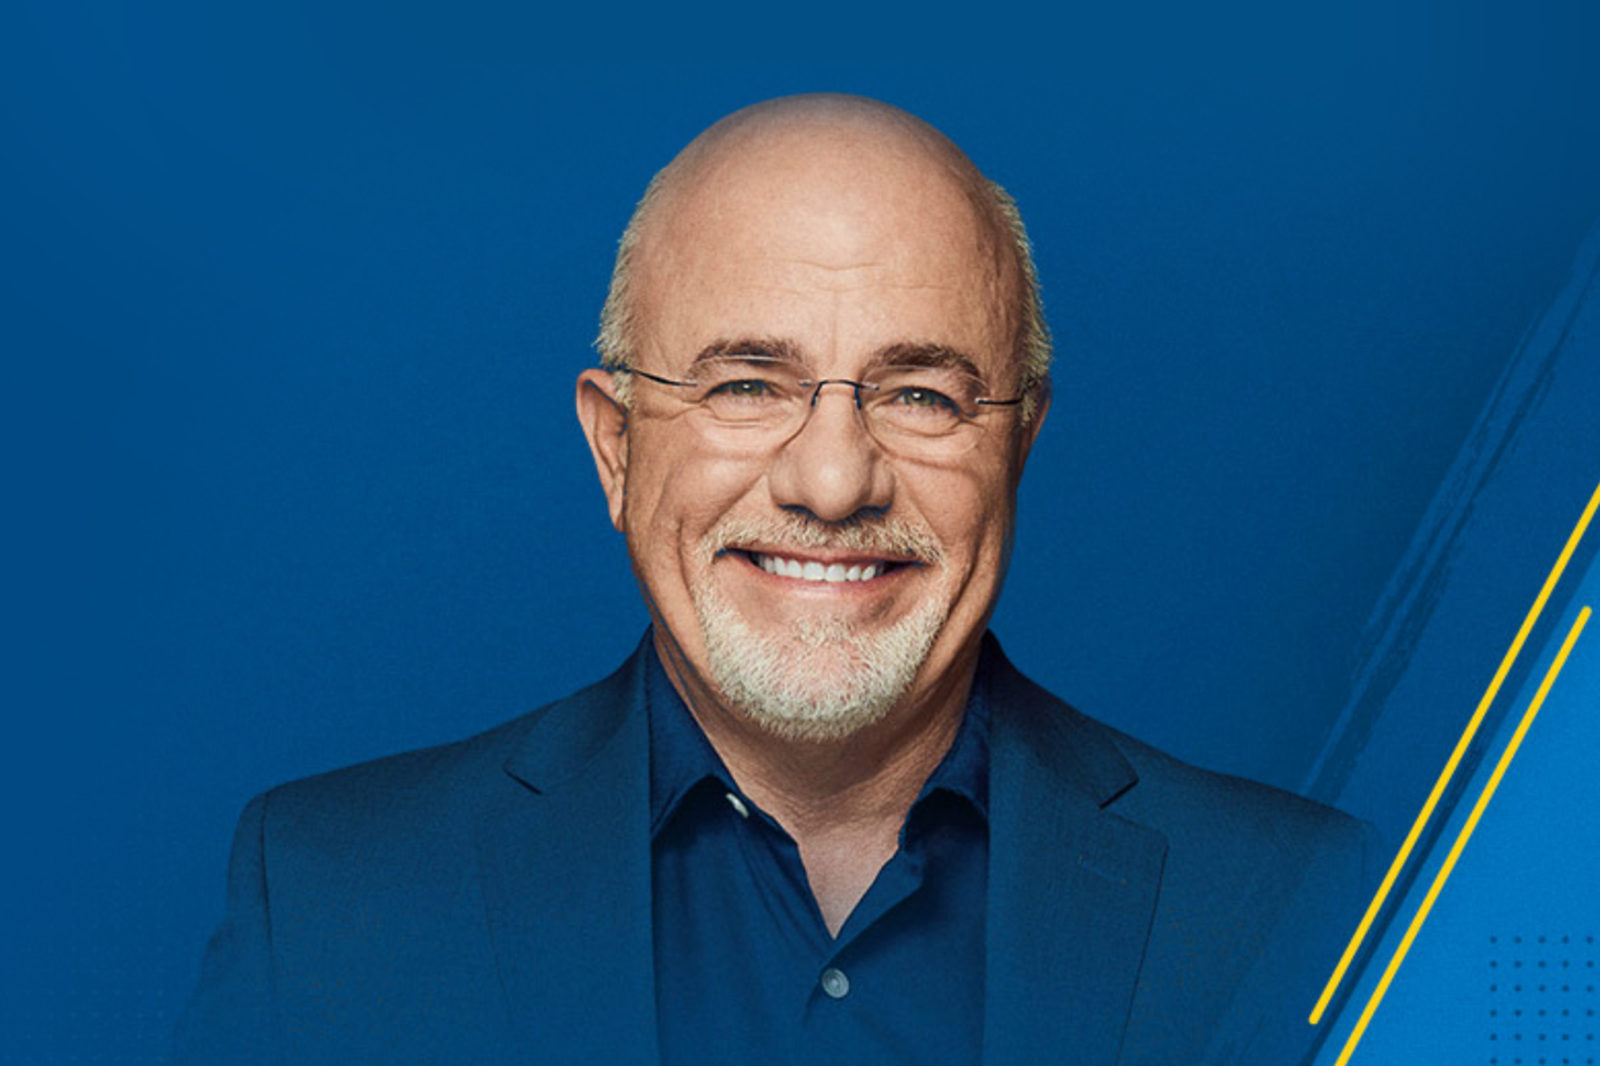 Who Is Dave Ramsey?